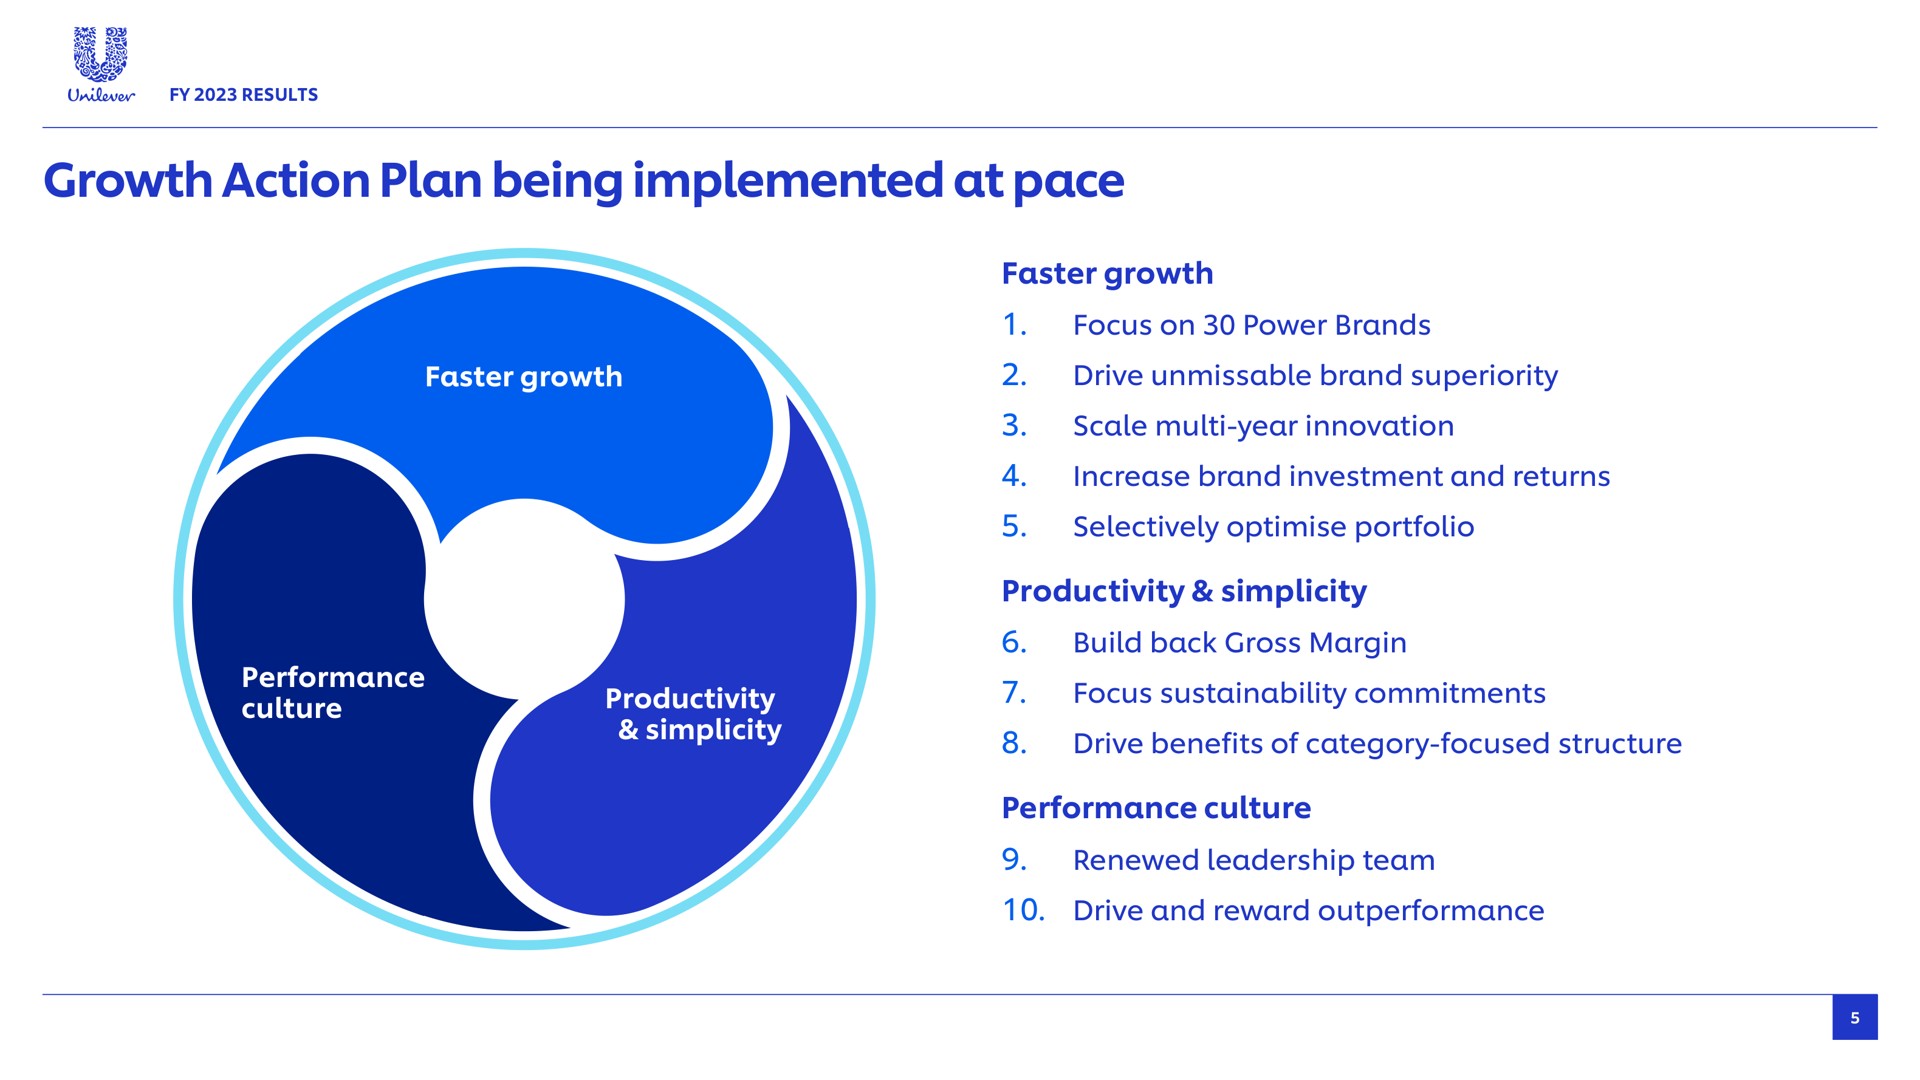 growth action plan being implemented at pace faster drive unmissable brand superiority faster focus on power brands productivity performance culture eel scale year innovation increase brand investment and returns selectively portfolio productivity simplicity build back gross margin focus commitments drive benefits of category focused structure performance culture renewed leadership team drive and reward | Unilever